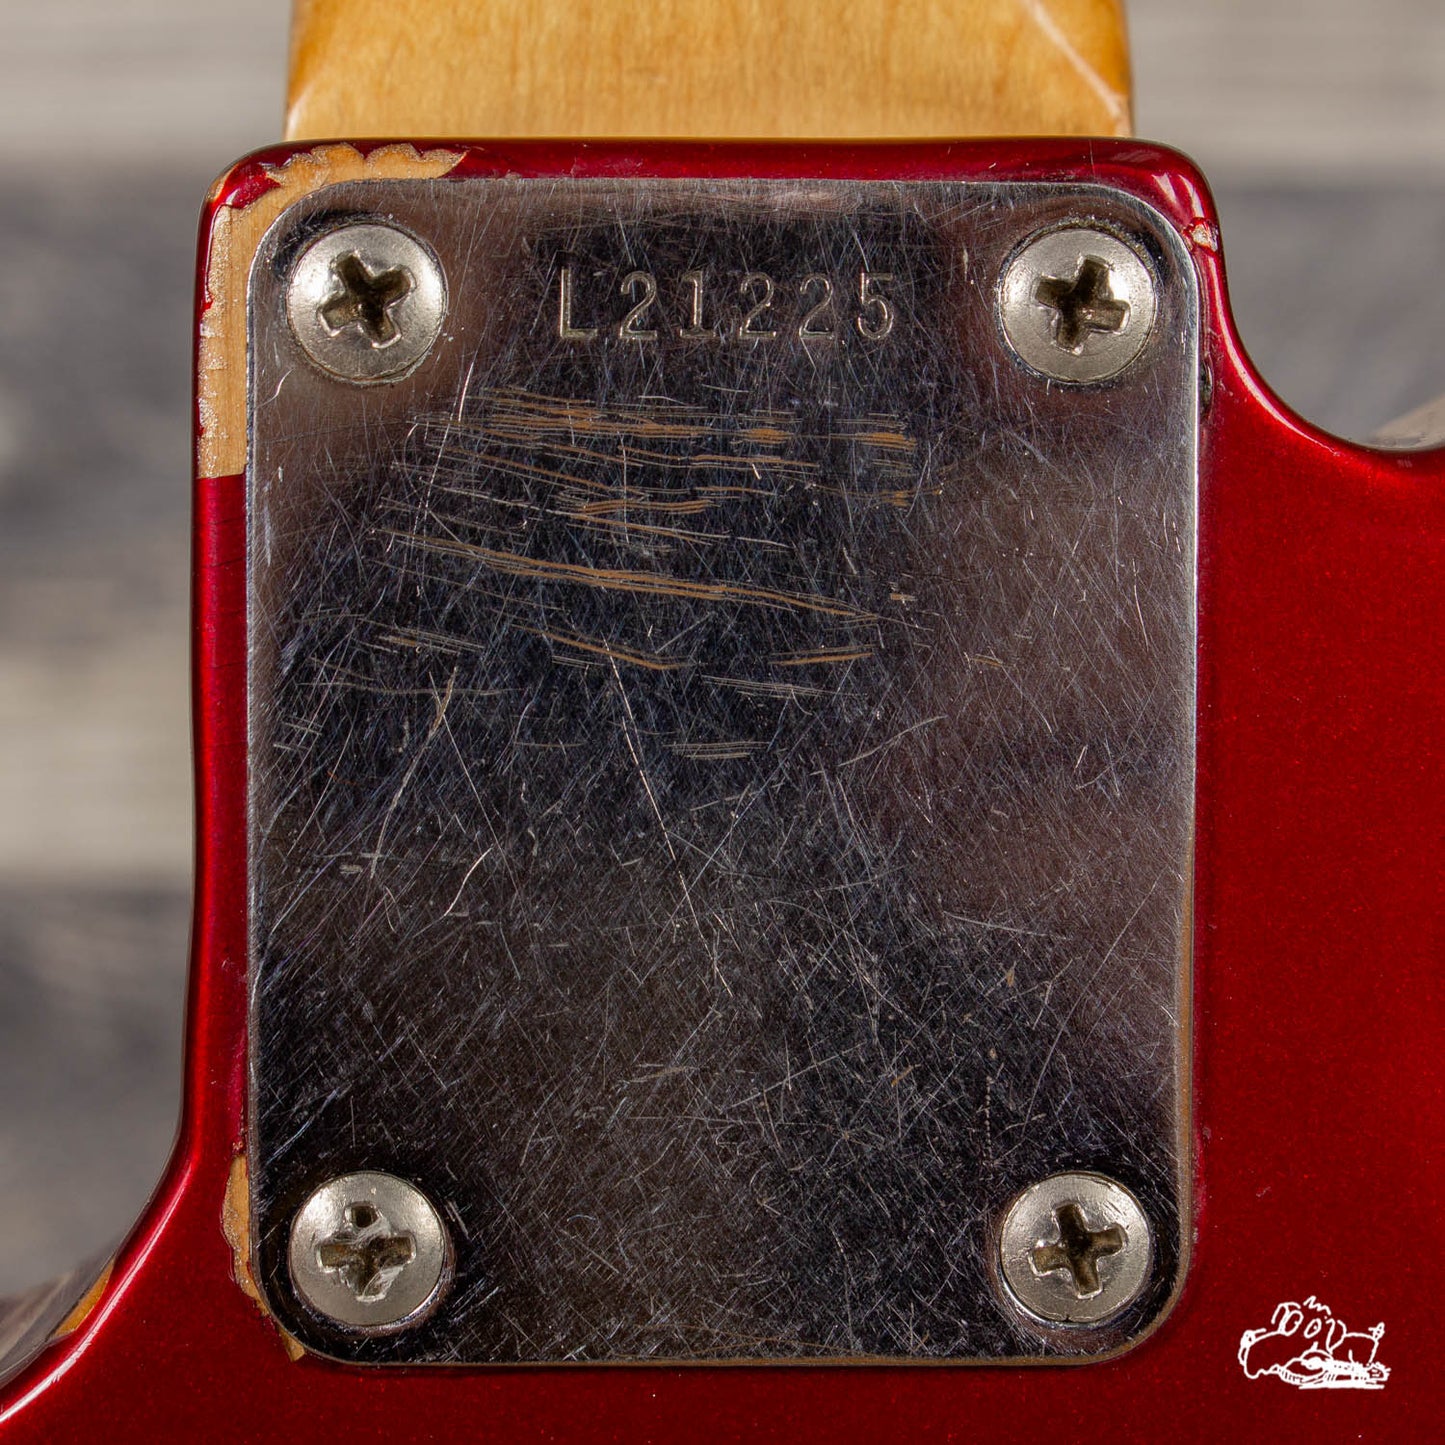 1963 Fender Telecaster, Candy Apple Red